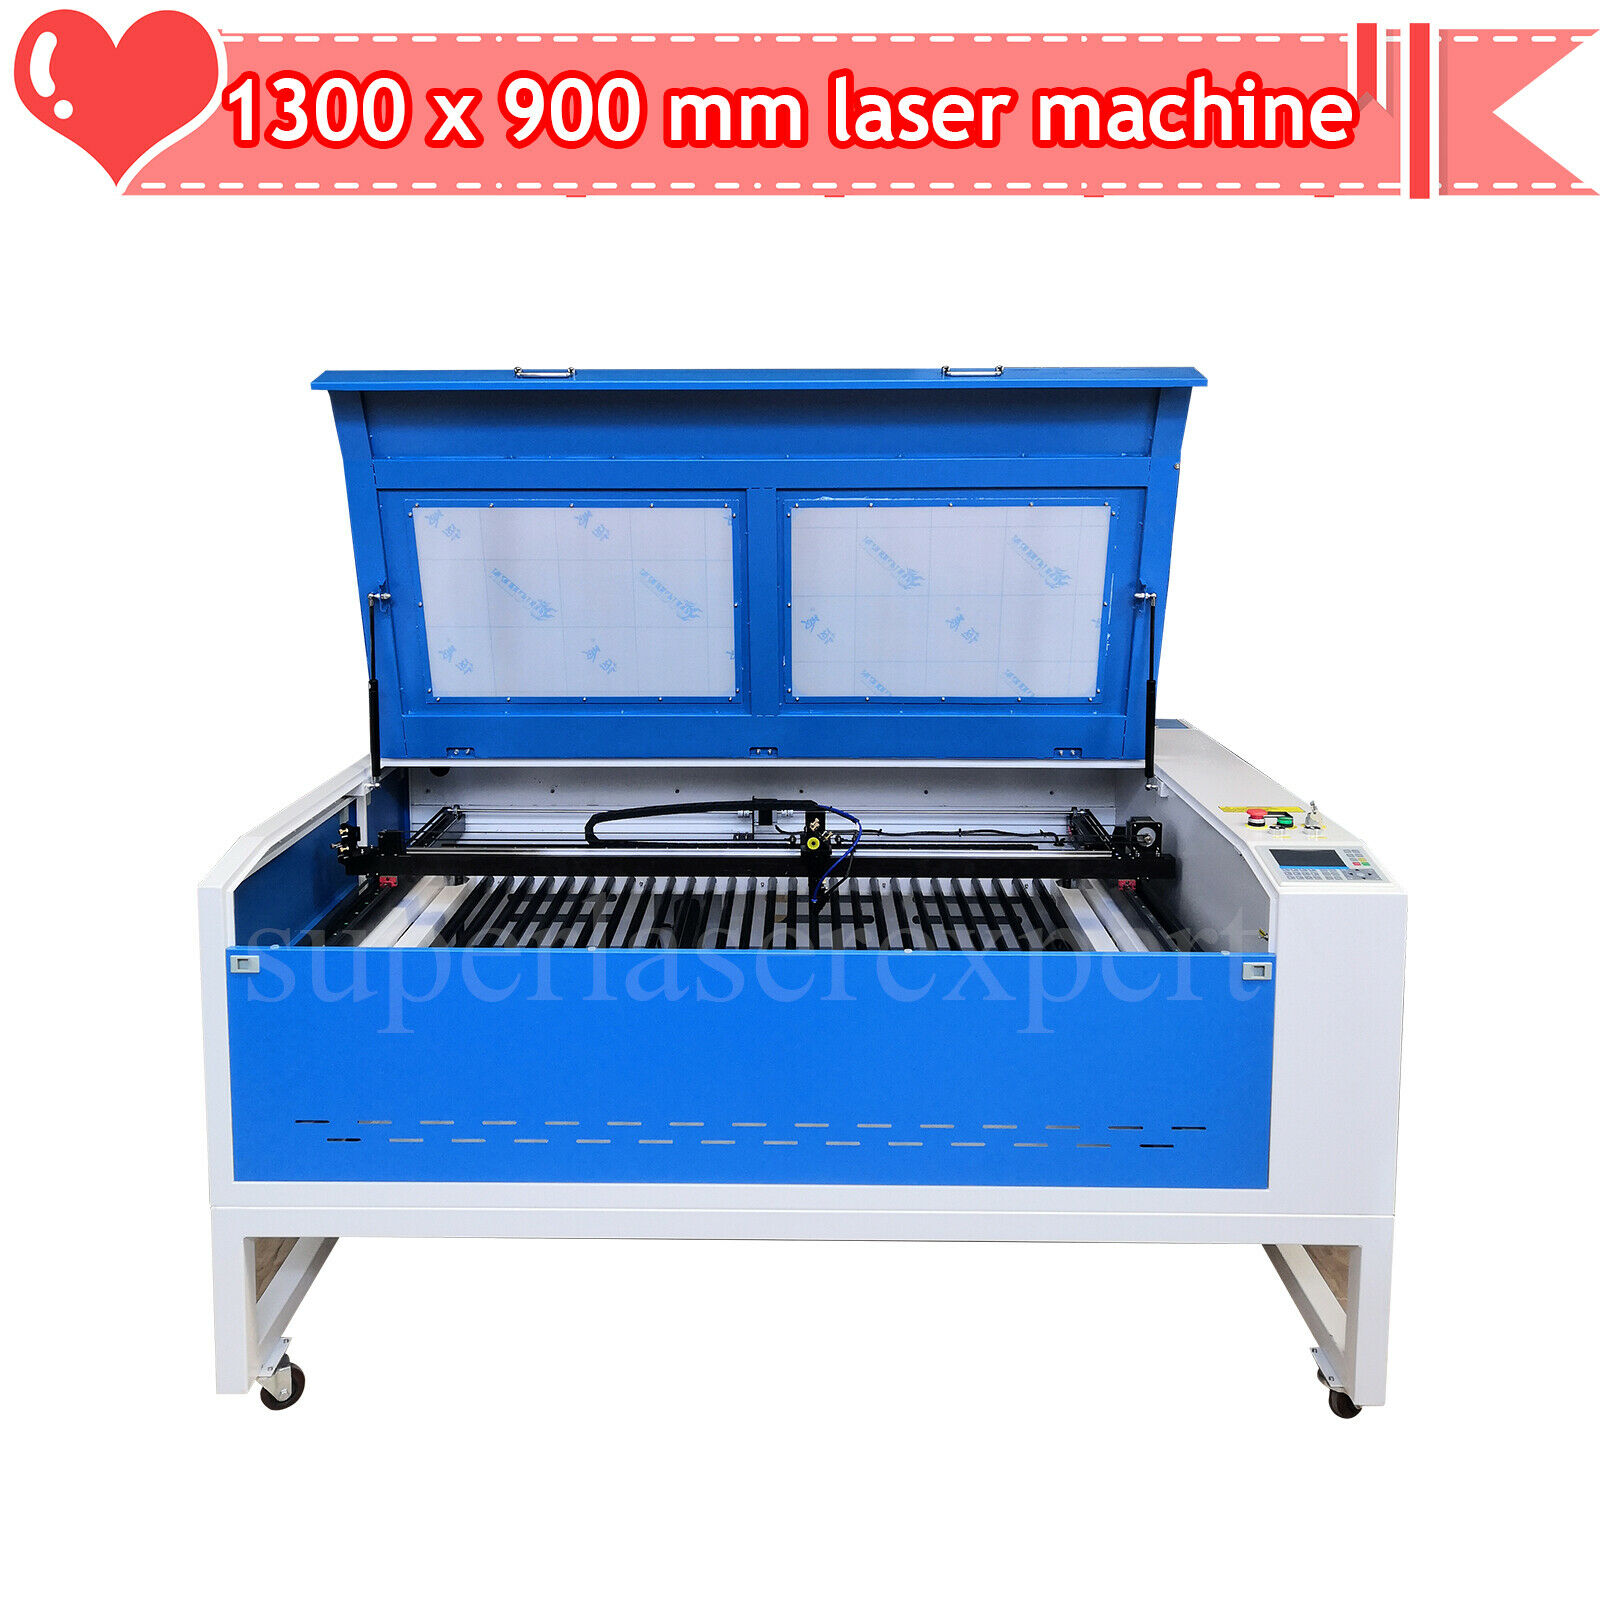 Reci 100w W2 Co2 Laser Cutting&engraving Machine 1300*900mm With Motorized Table